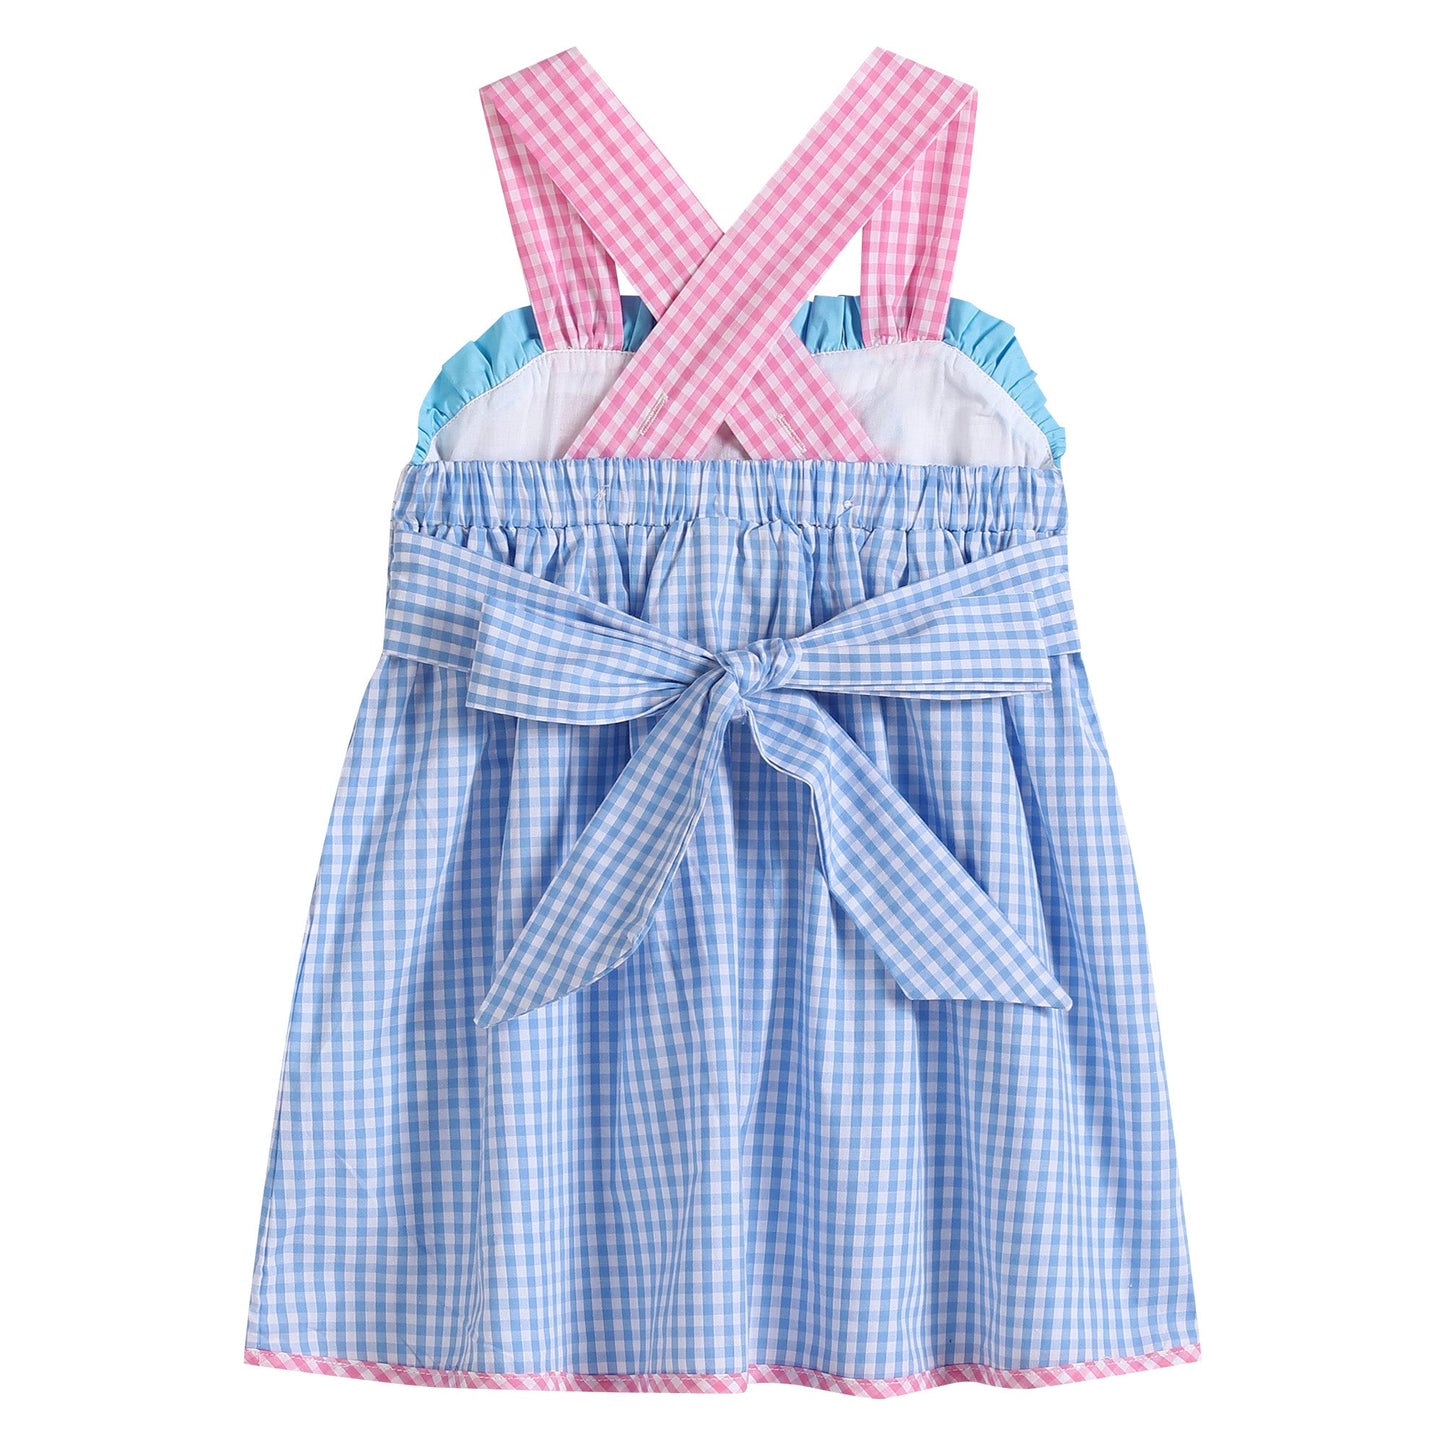 Blue Gingham Sleeveless Smocked Dress with Embroidered Pink Sailboats